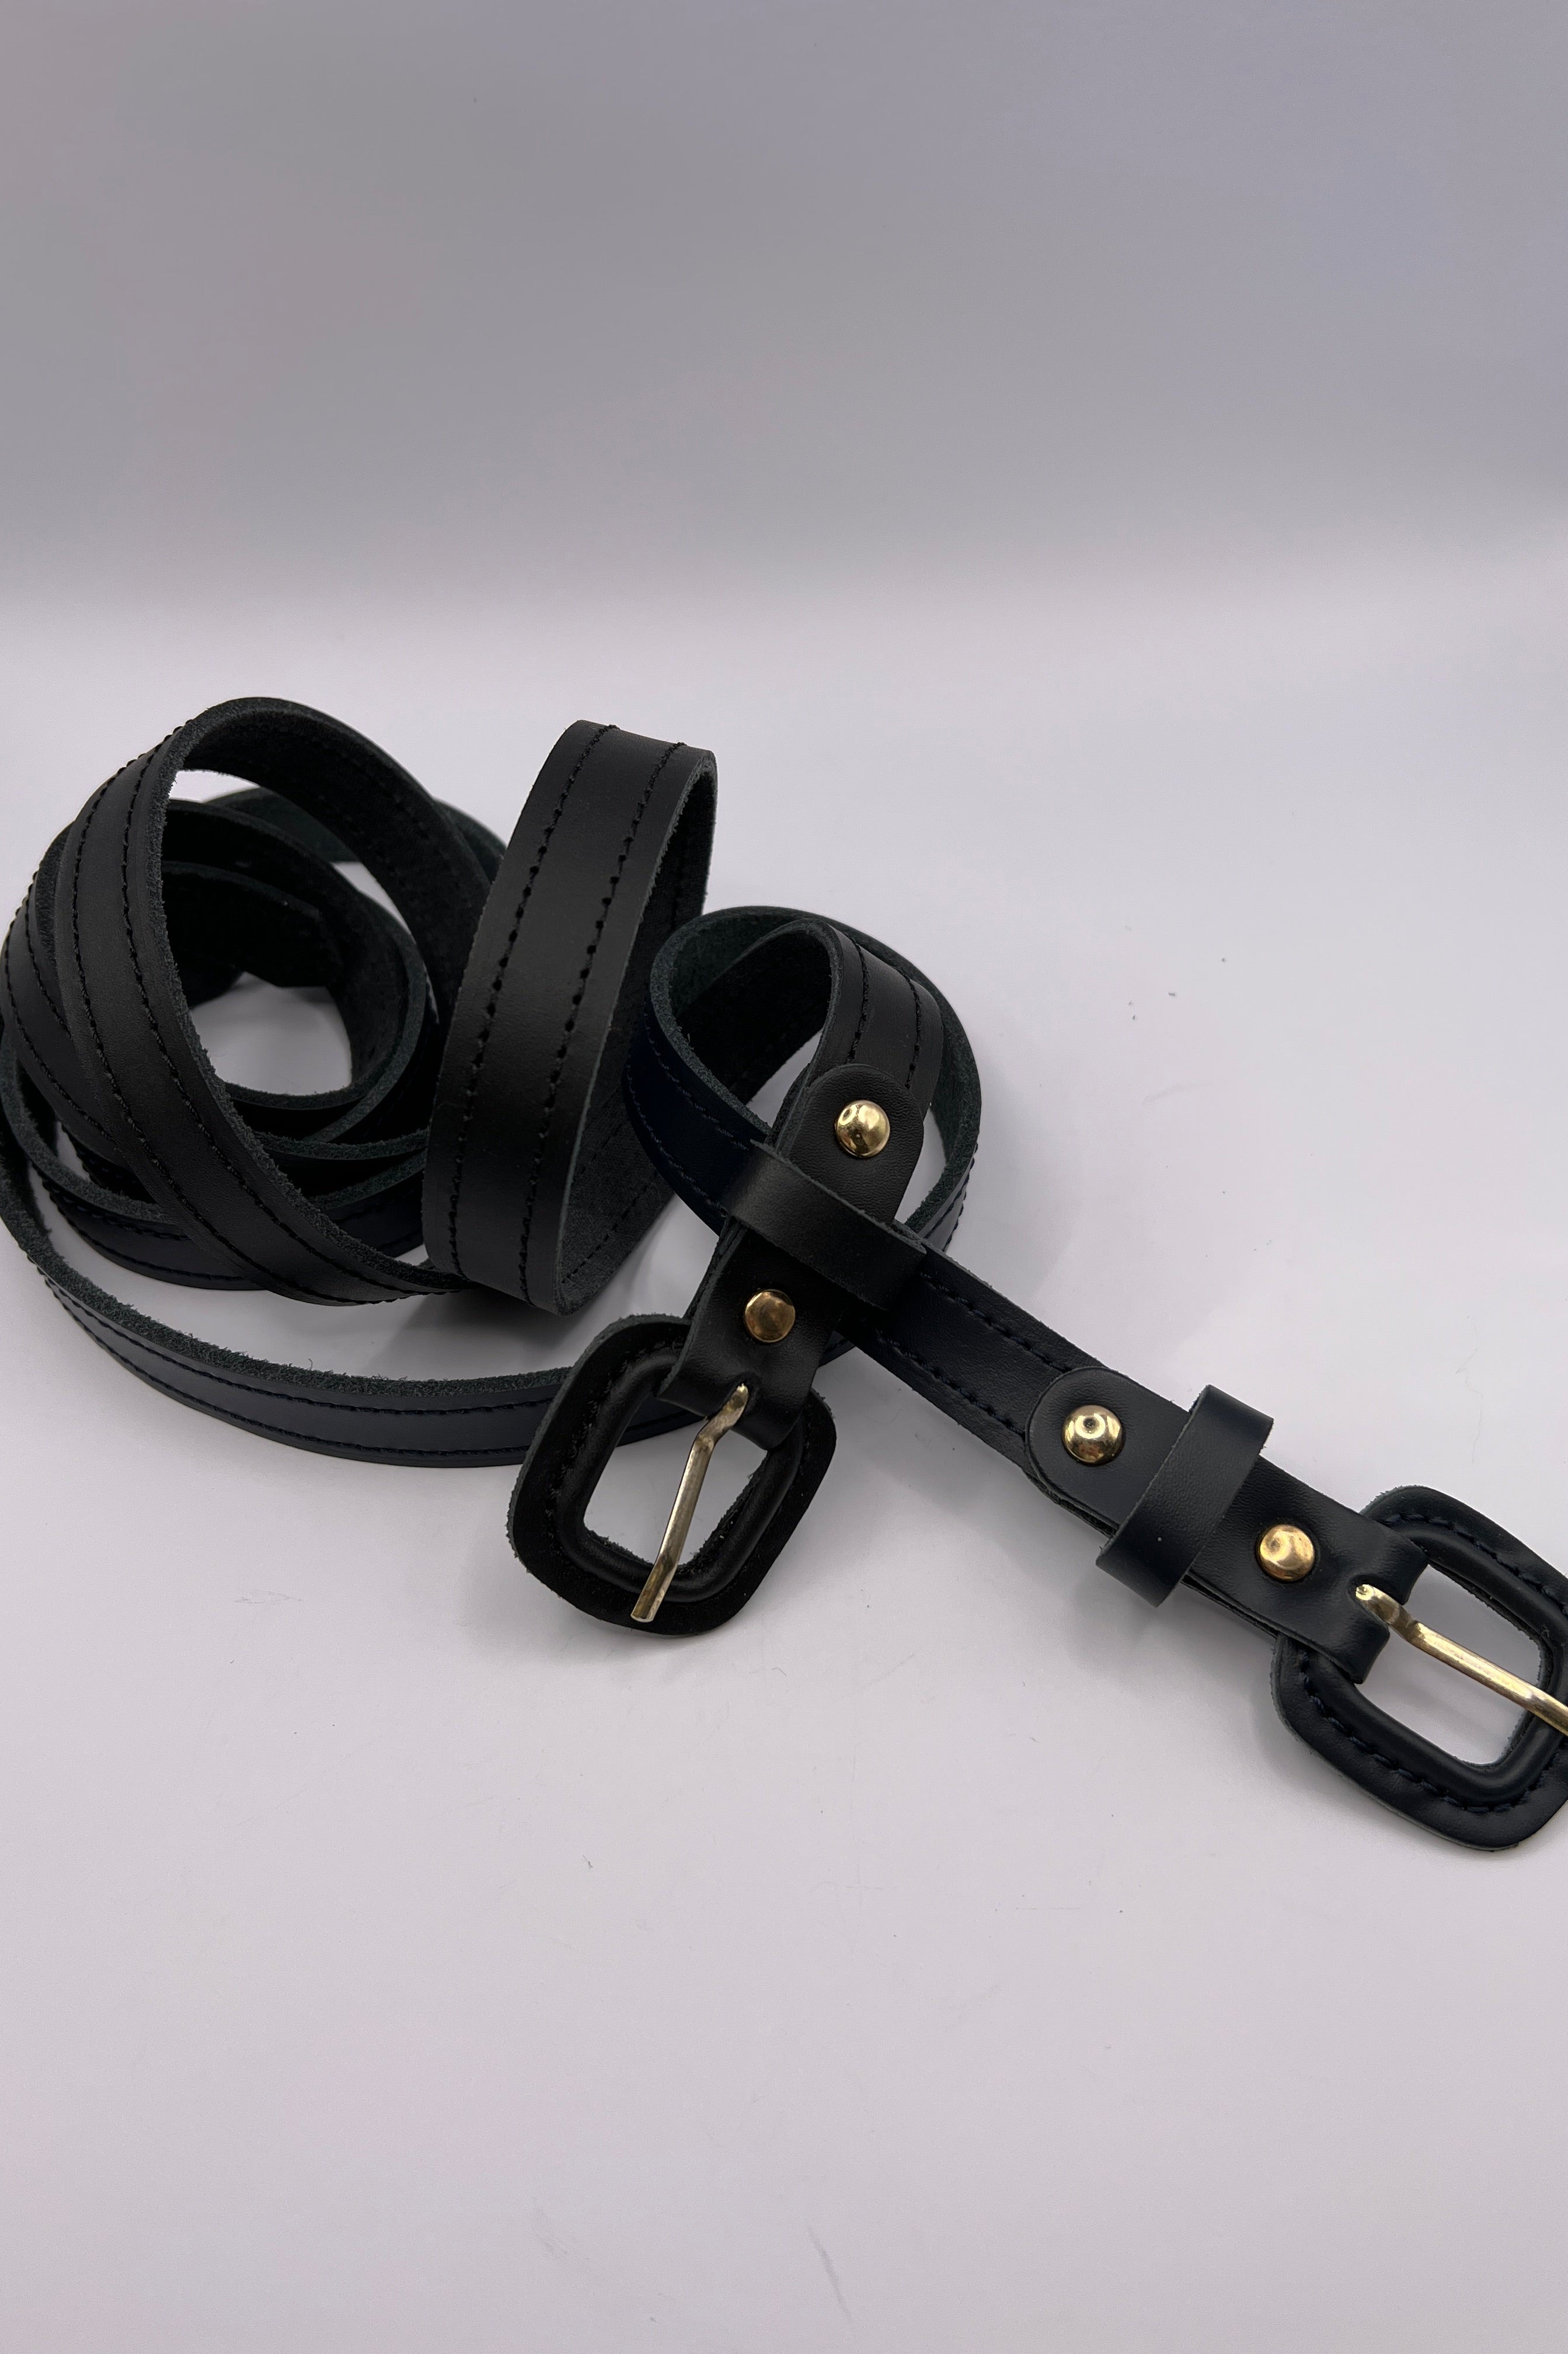 Finest Black and Marine Belt with Gold Adornment (pack of 2) BLONDISH